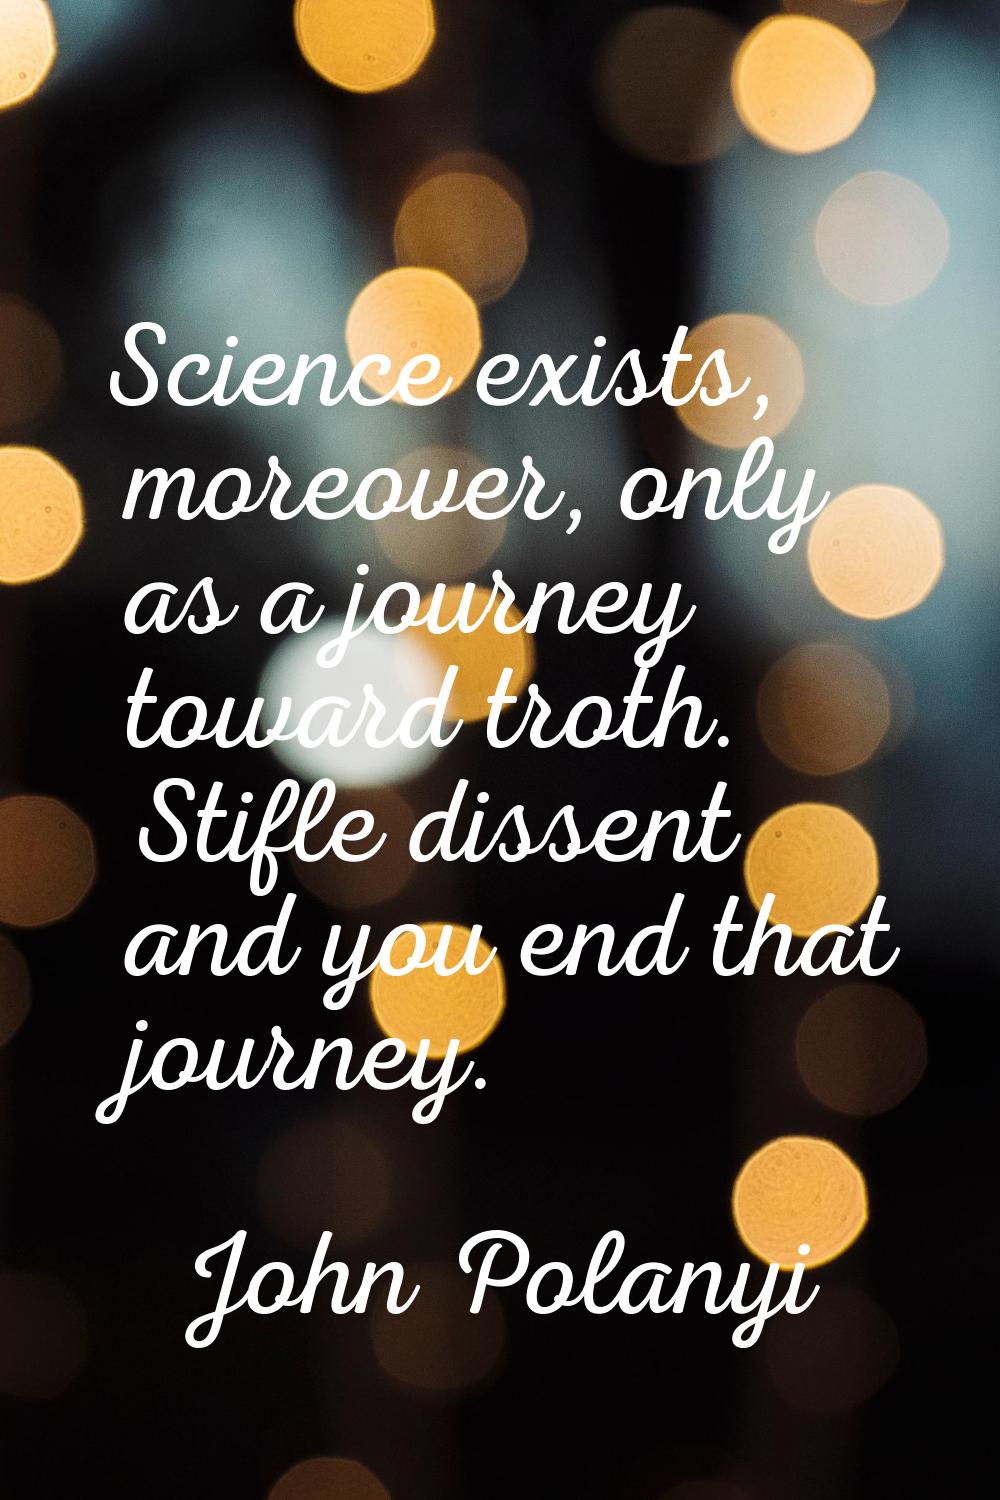 Science exists, moreover, only as a journey toward troth. Stifle dissent and you end that journey.